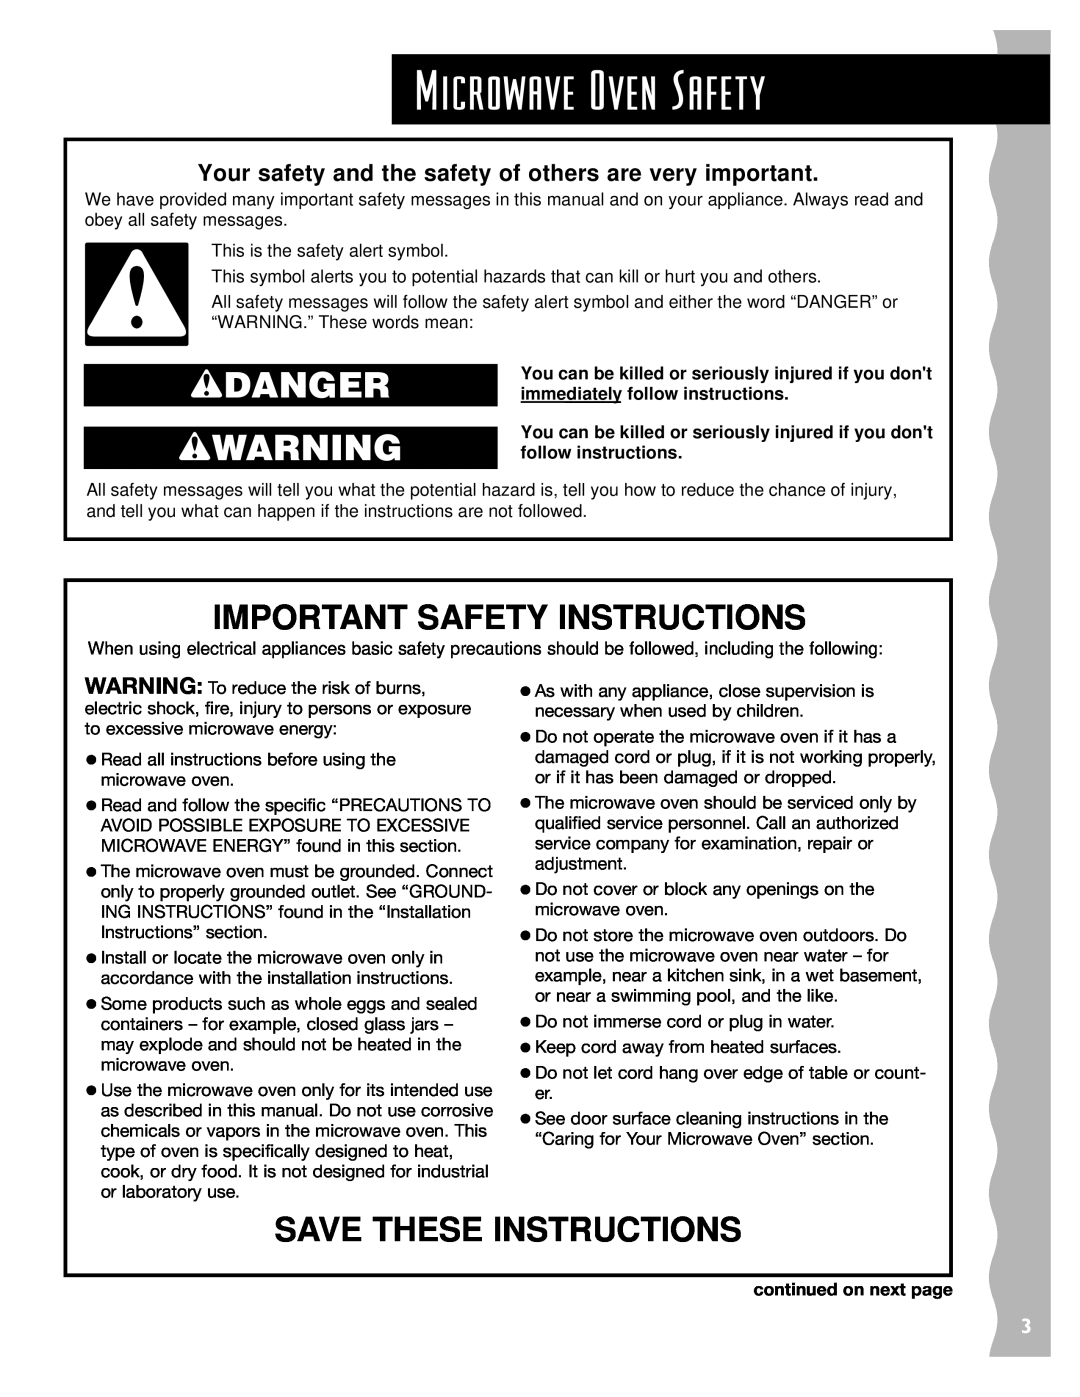 KitchenAid KCMS145JWH Microwave Oven Safety, wDANGER wWARNING, Important Safety Instructions, Save These Instructions 